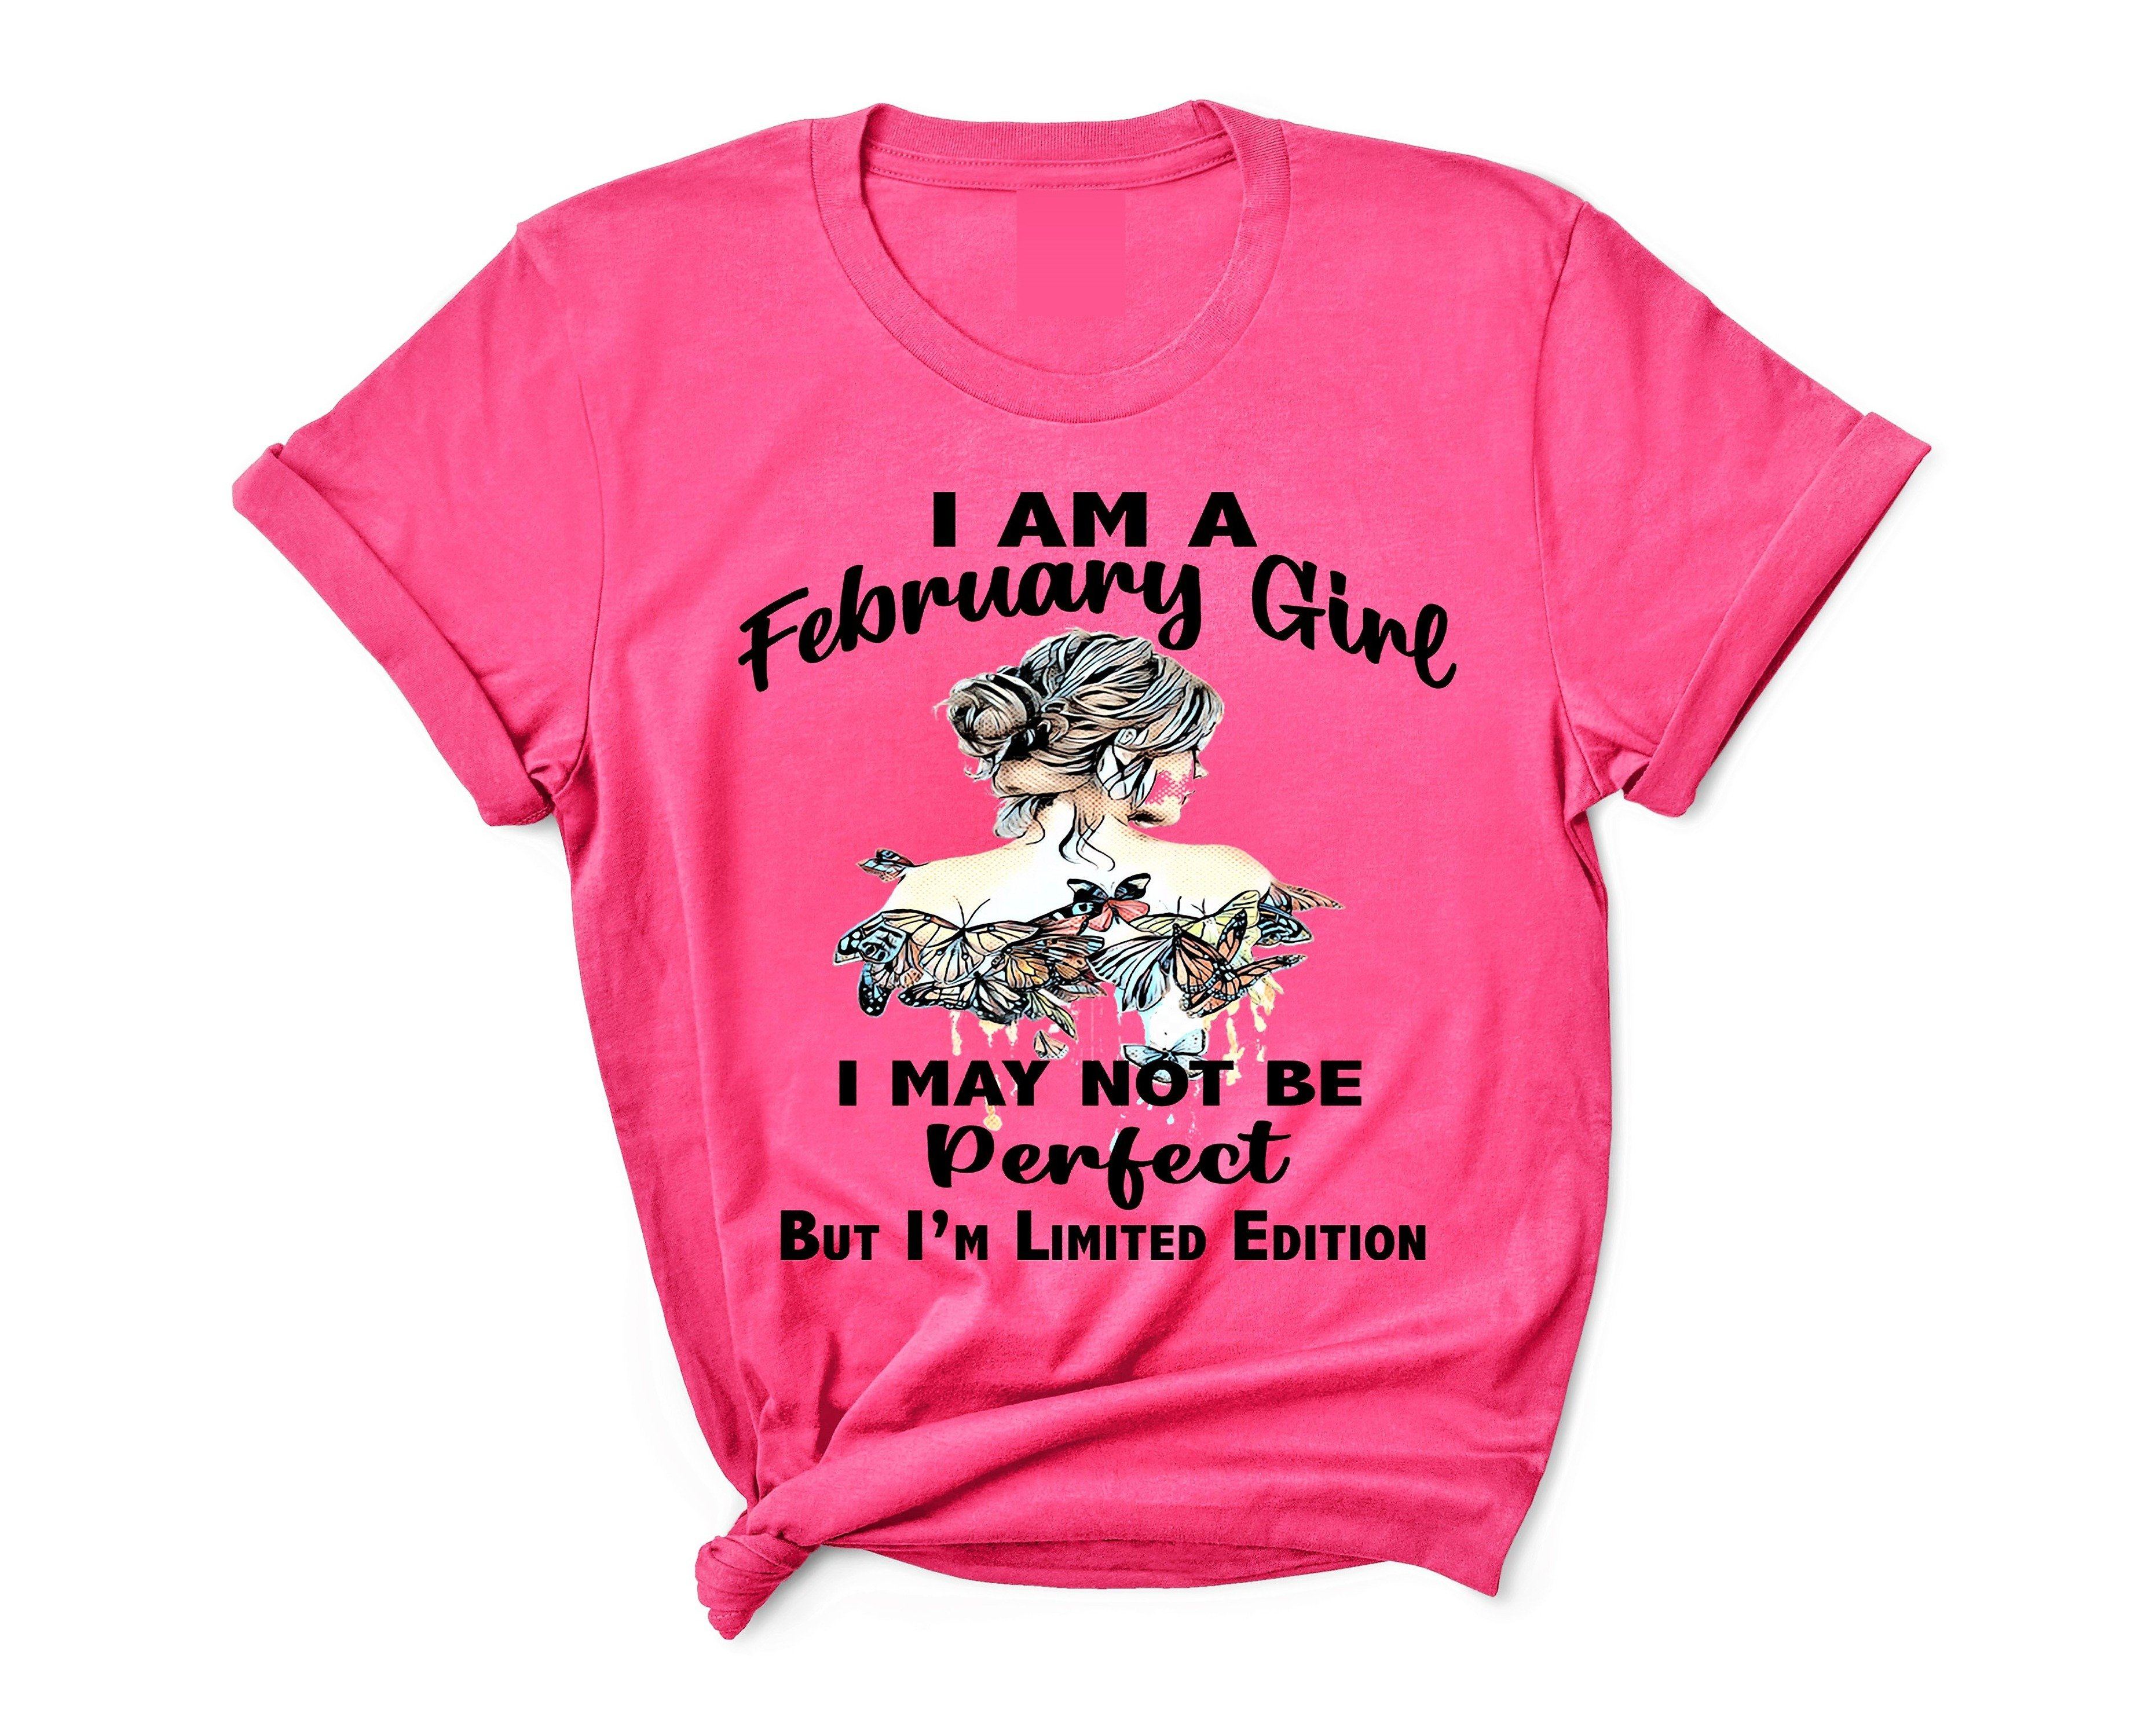 "May Not be perfect but Limited Edition - February Girl